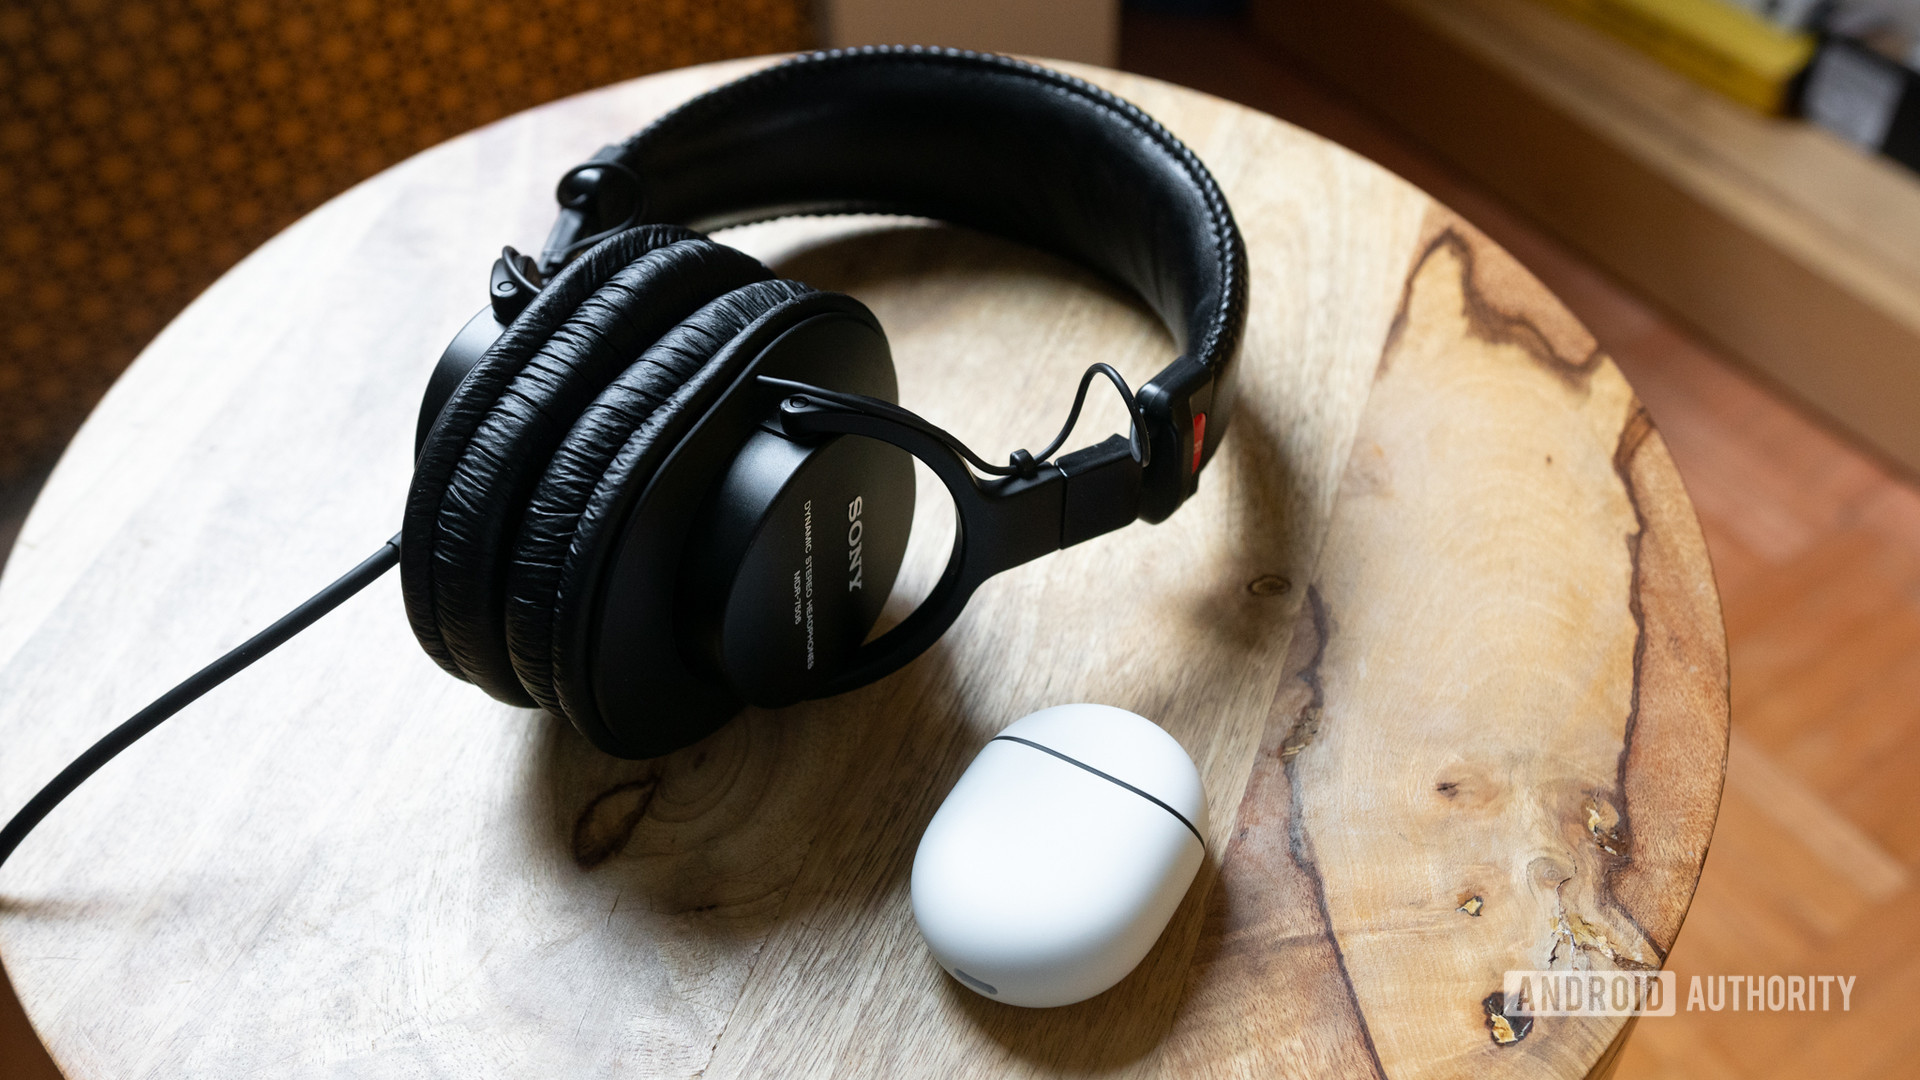 Sony MDR-7506 headphones and new Google Pixel Buds on a wooden stool